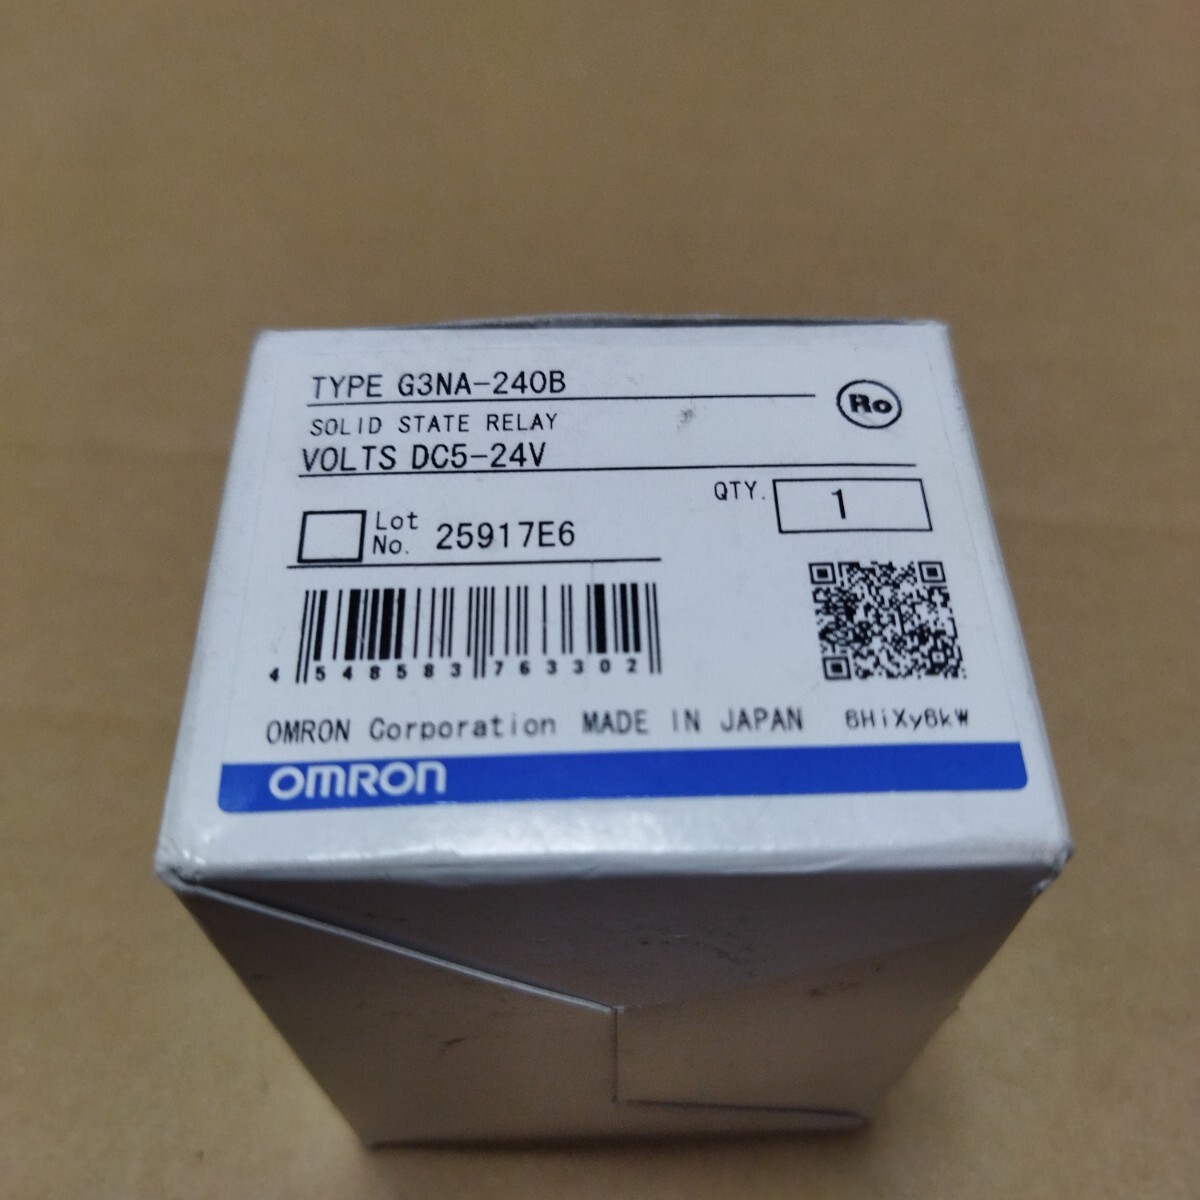  Omron SSR solid state relay G3NA-240B